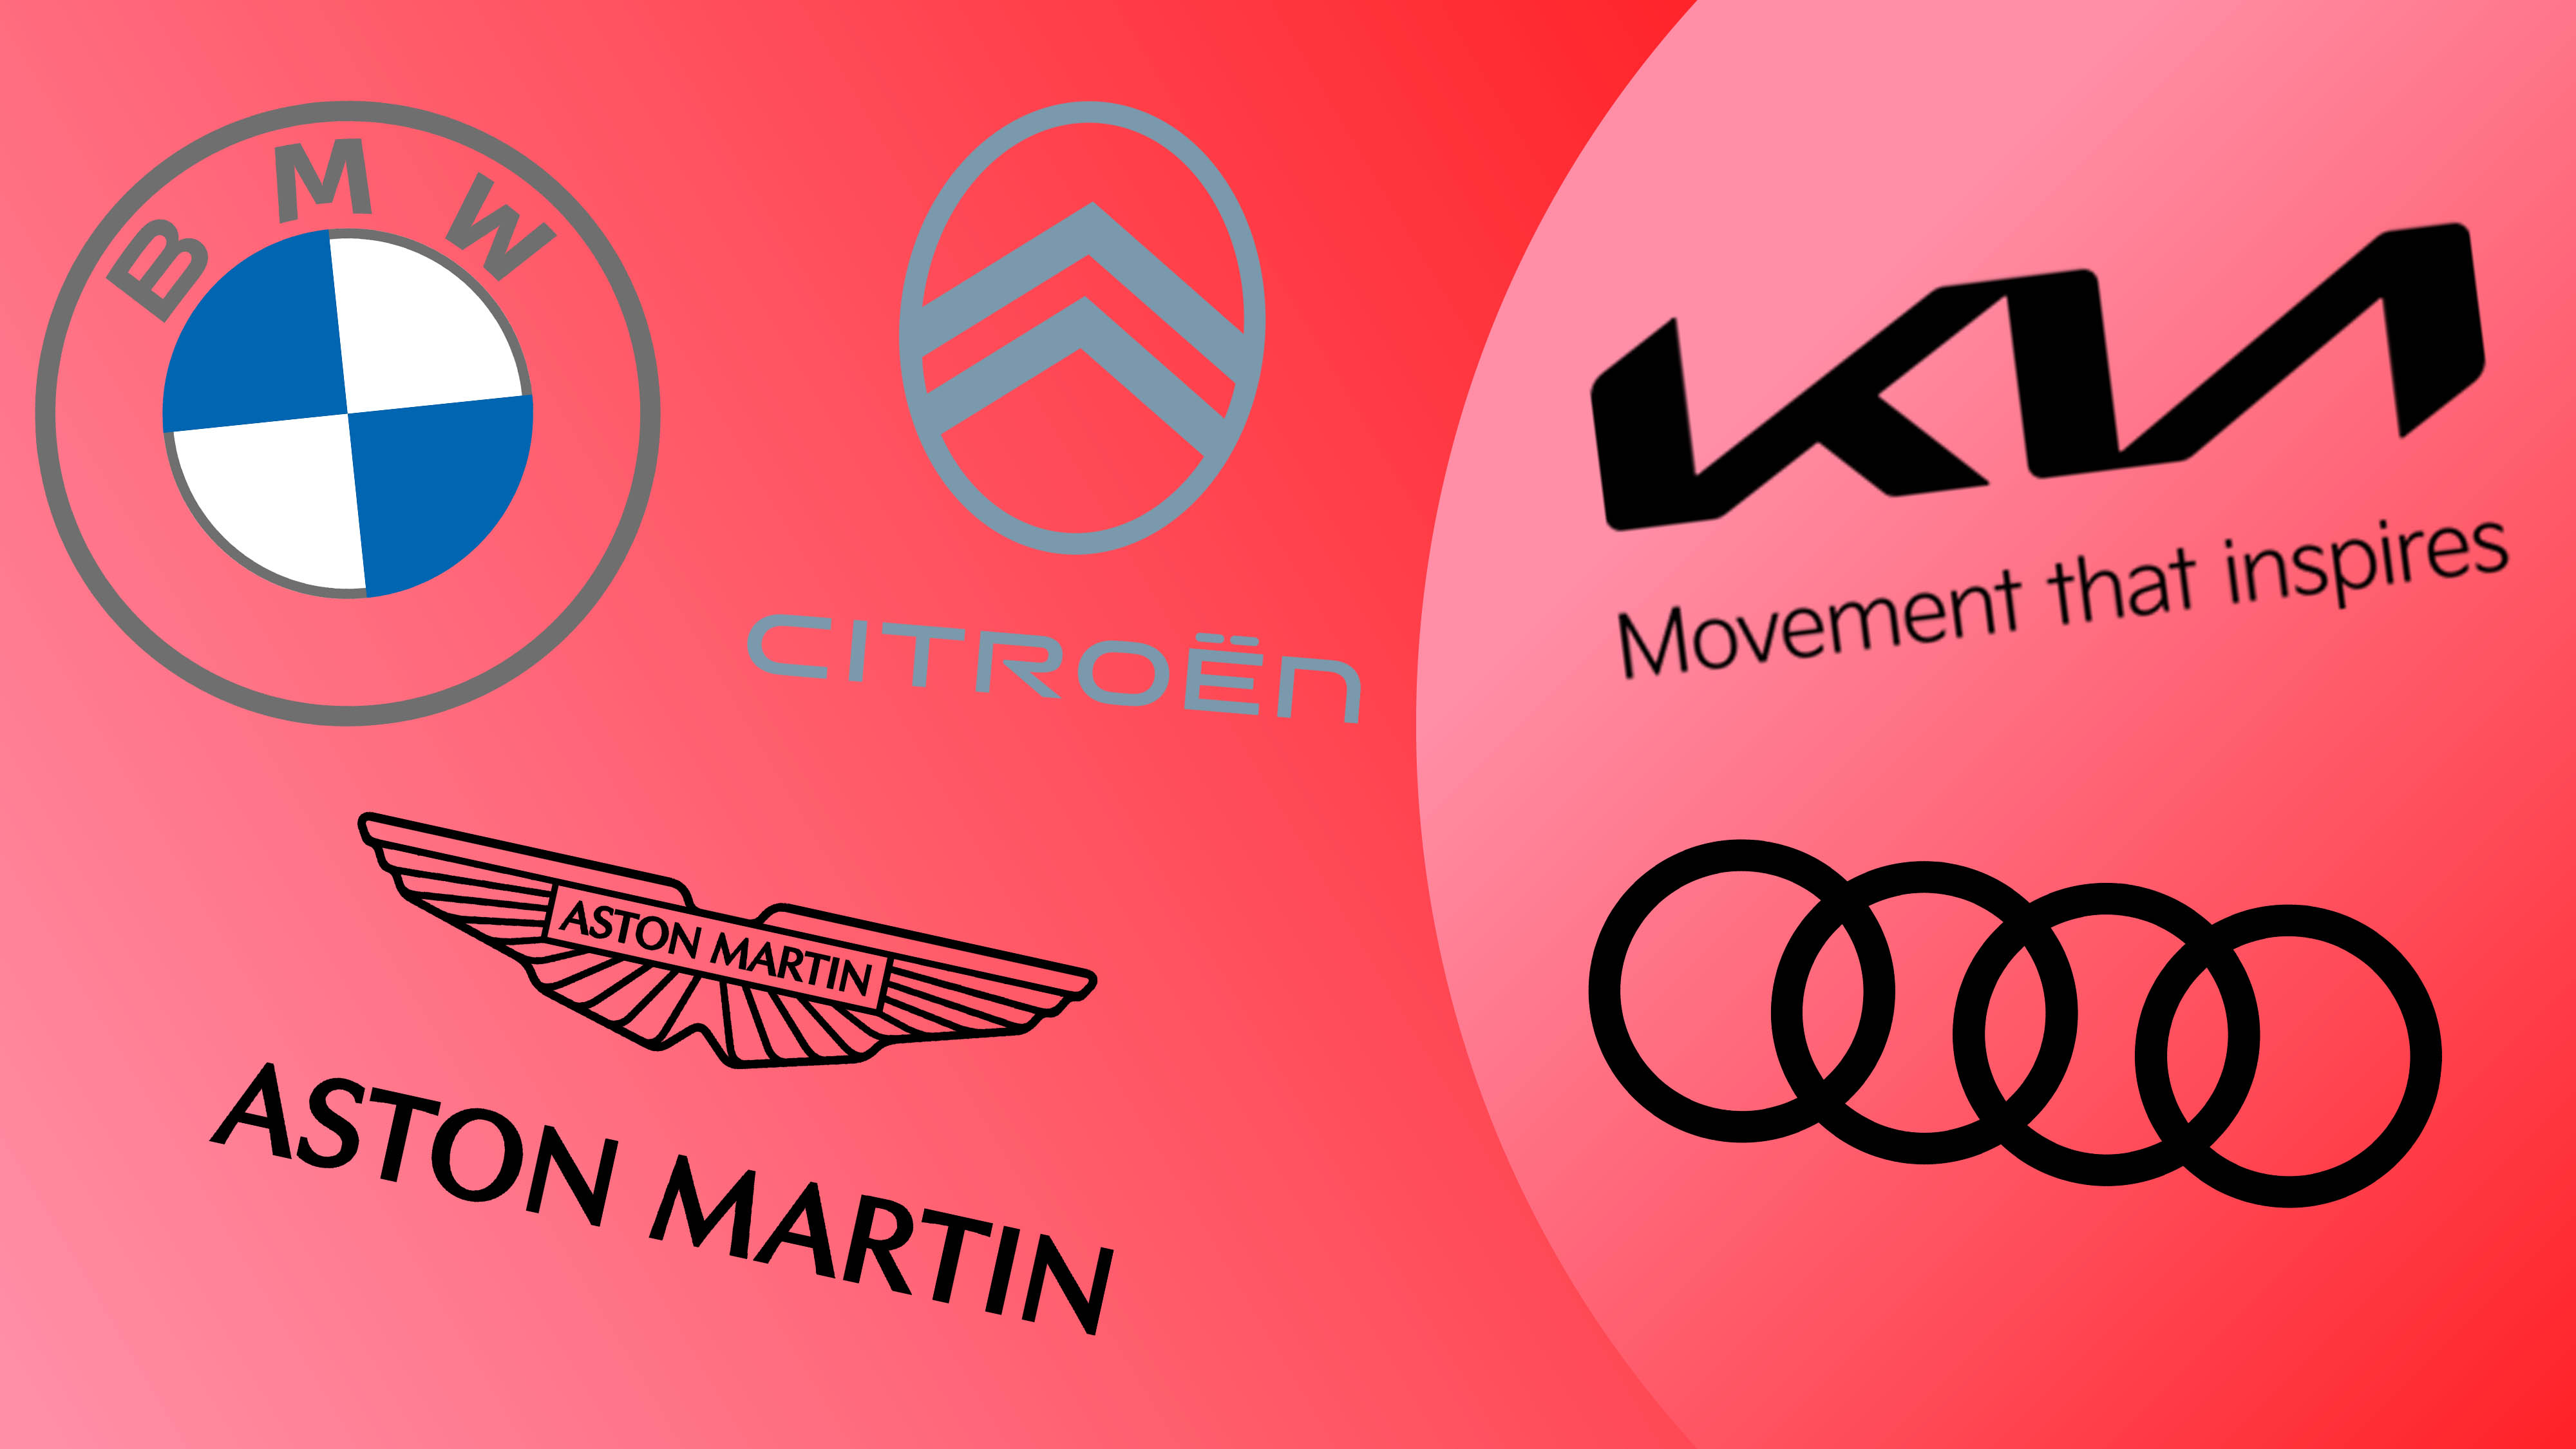 Car logo redesigns: the good, the bad and the ugly